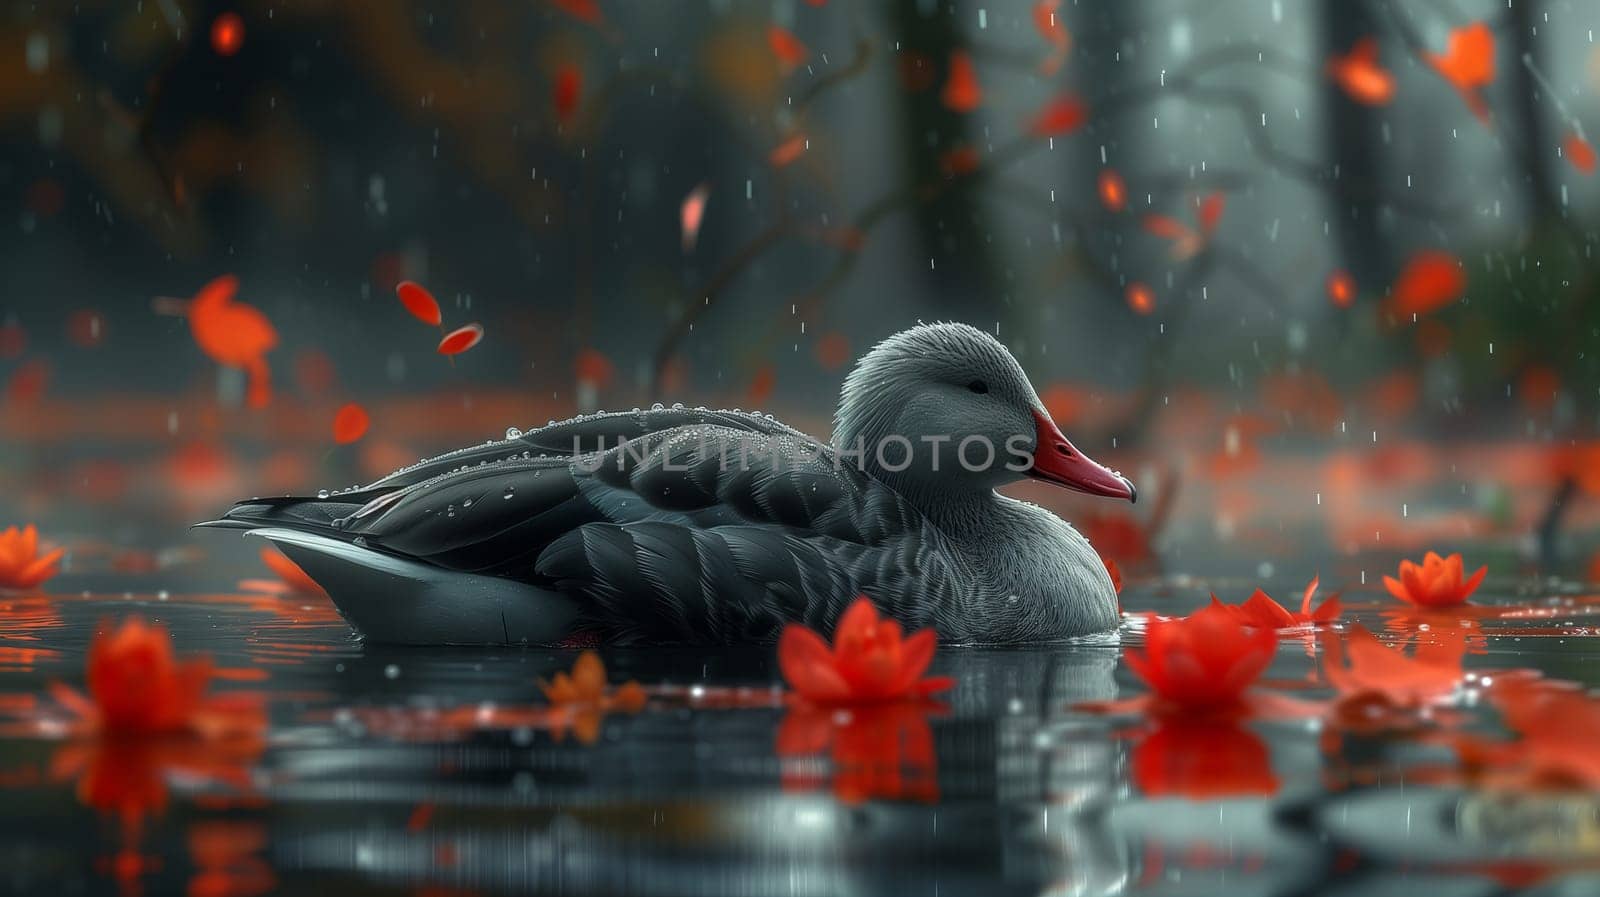 A water bird with a beak is swimming in a pond among red leaves by richwolf